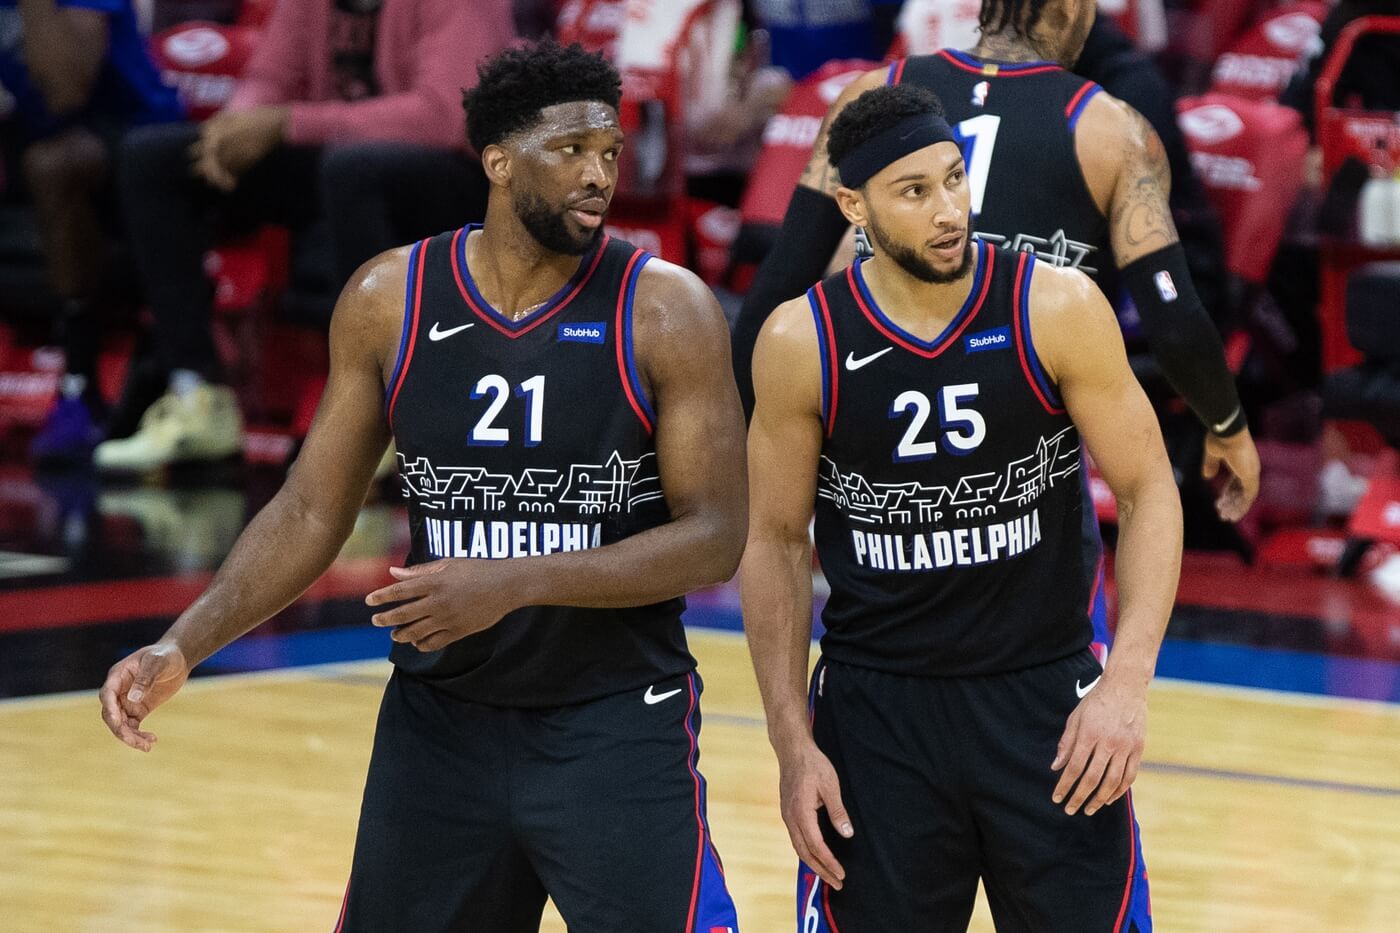 Feb 27, 2021; Philadelphia, Pennsylvania, USA; Philadelphia 76ers guard Ben Simmons (25) and center Joel Embiid (21) look on during the third quarter against the Cleveland Cavaliers at Wells Fargo Center. Mandatory Credit: Bill Streicher-USA TODAY Sports